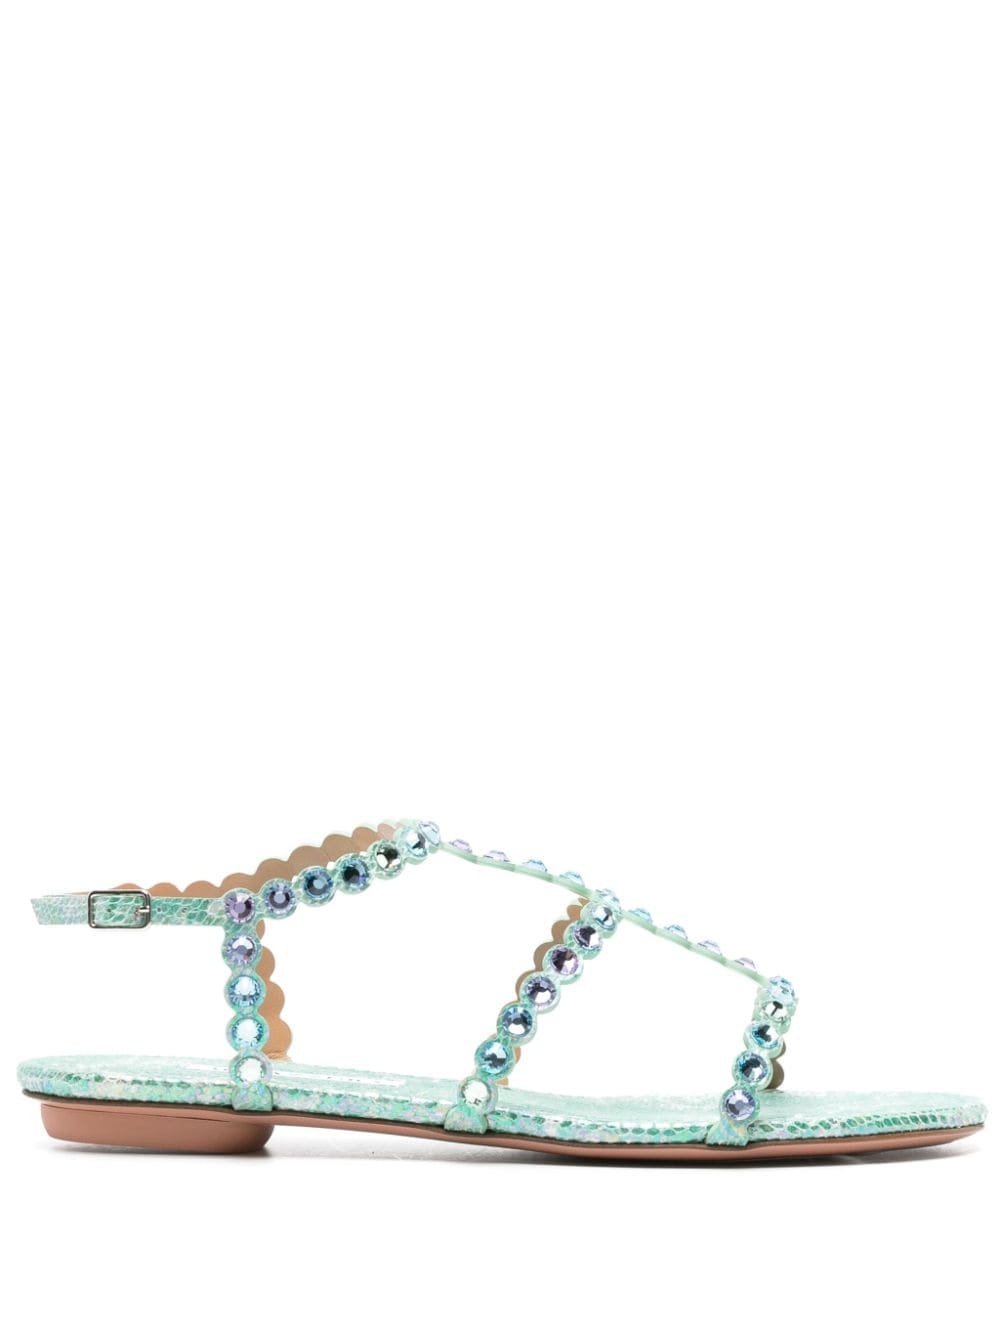 Tequila flat leather sandals - 1